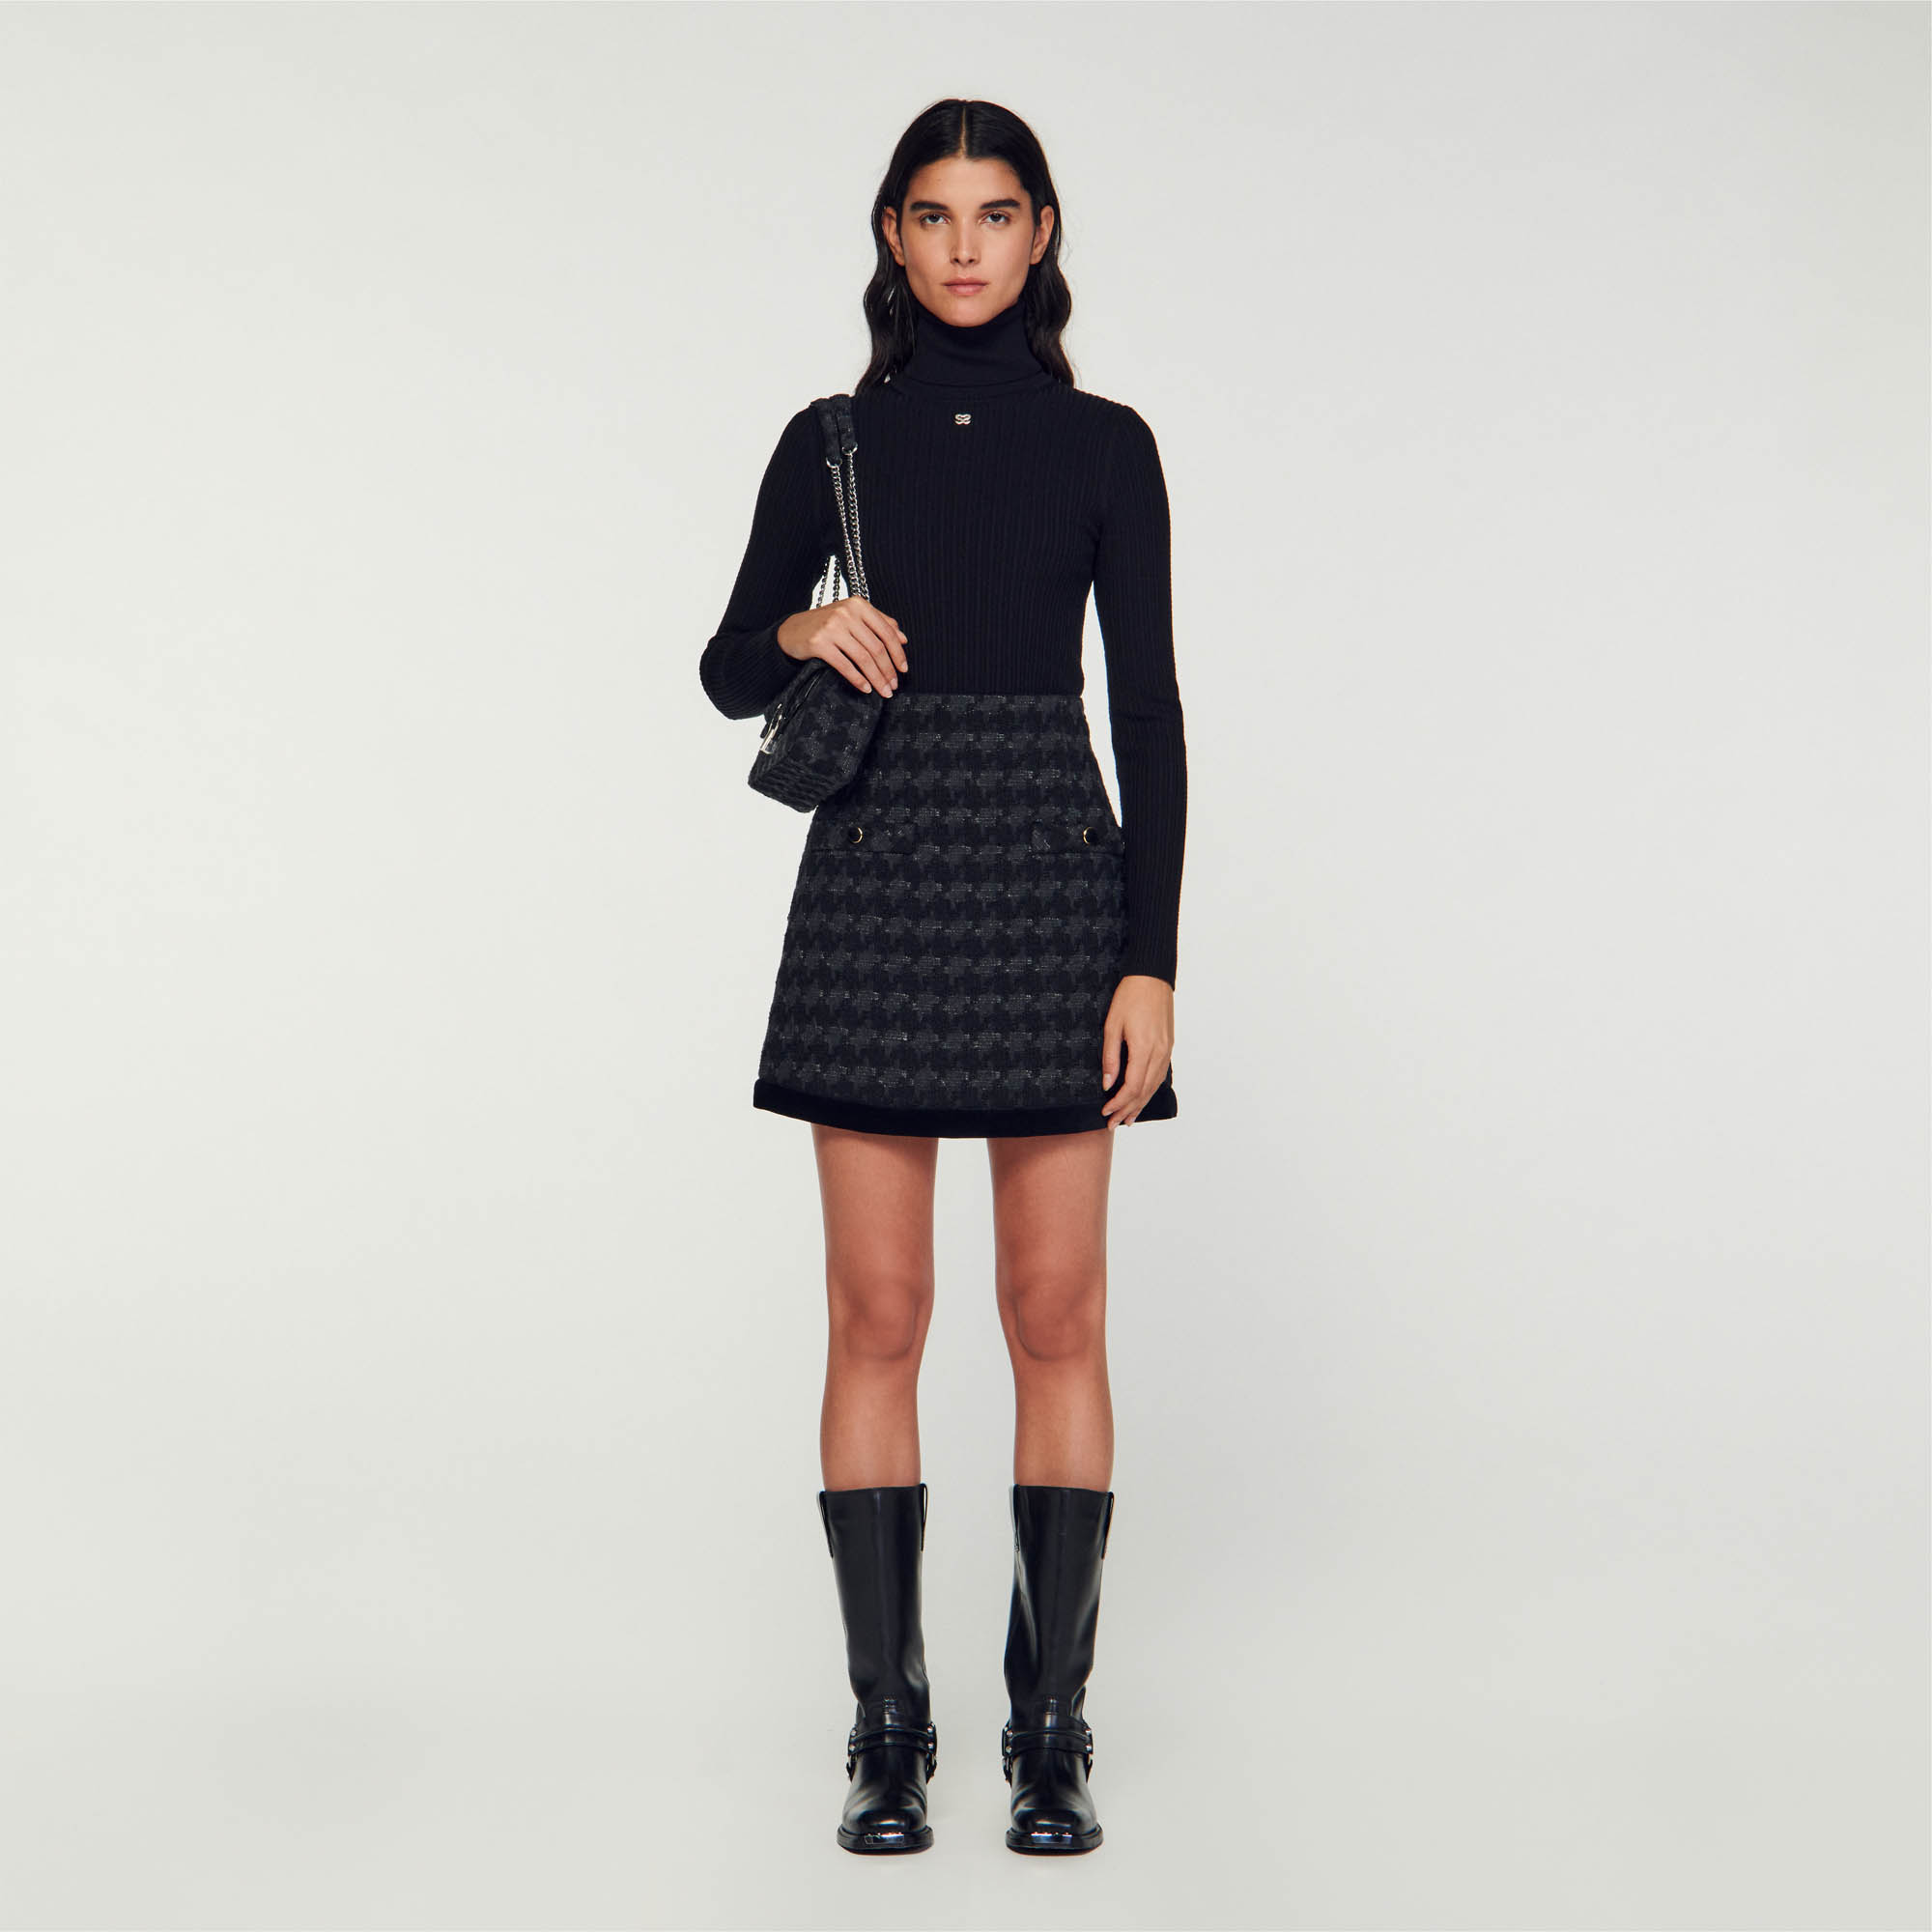 Sandro cotton Short tweed skirt featuring a houndstooth pattern, a contrasting velvet band on the bottom and mock pockets with buttons on the front